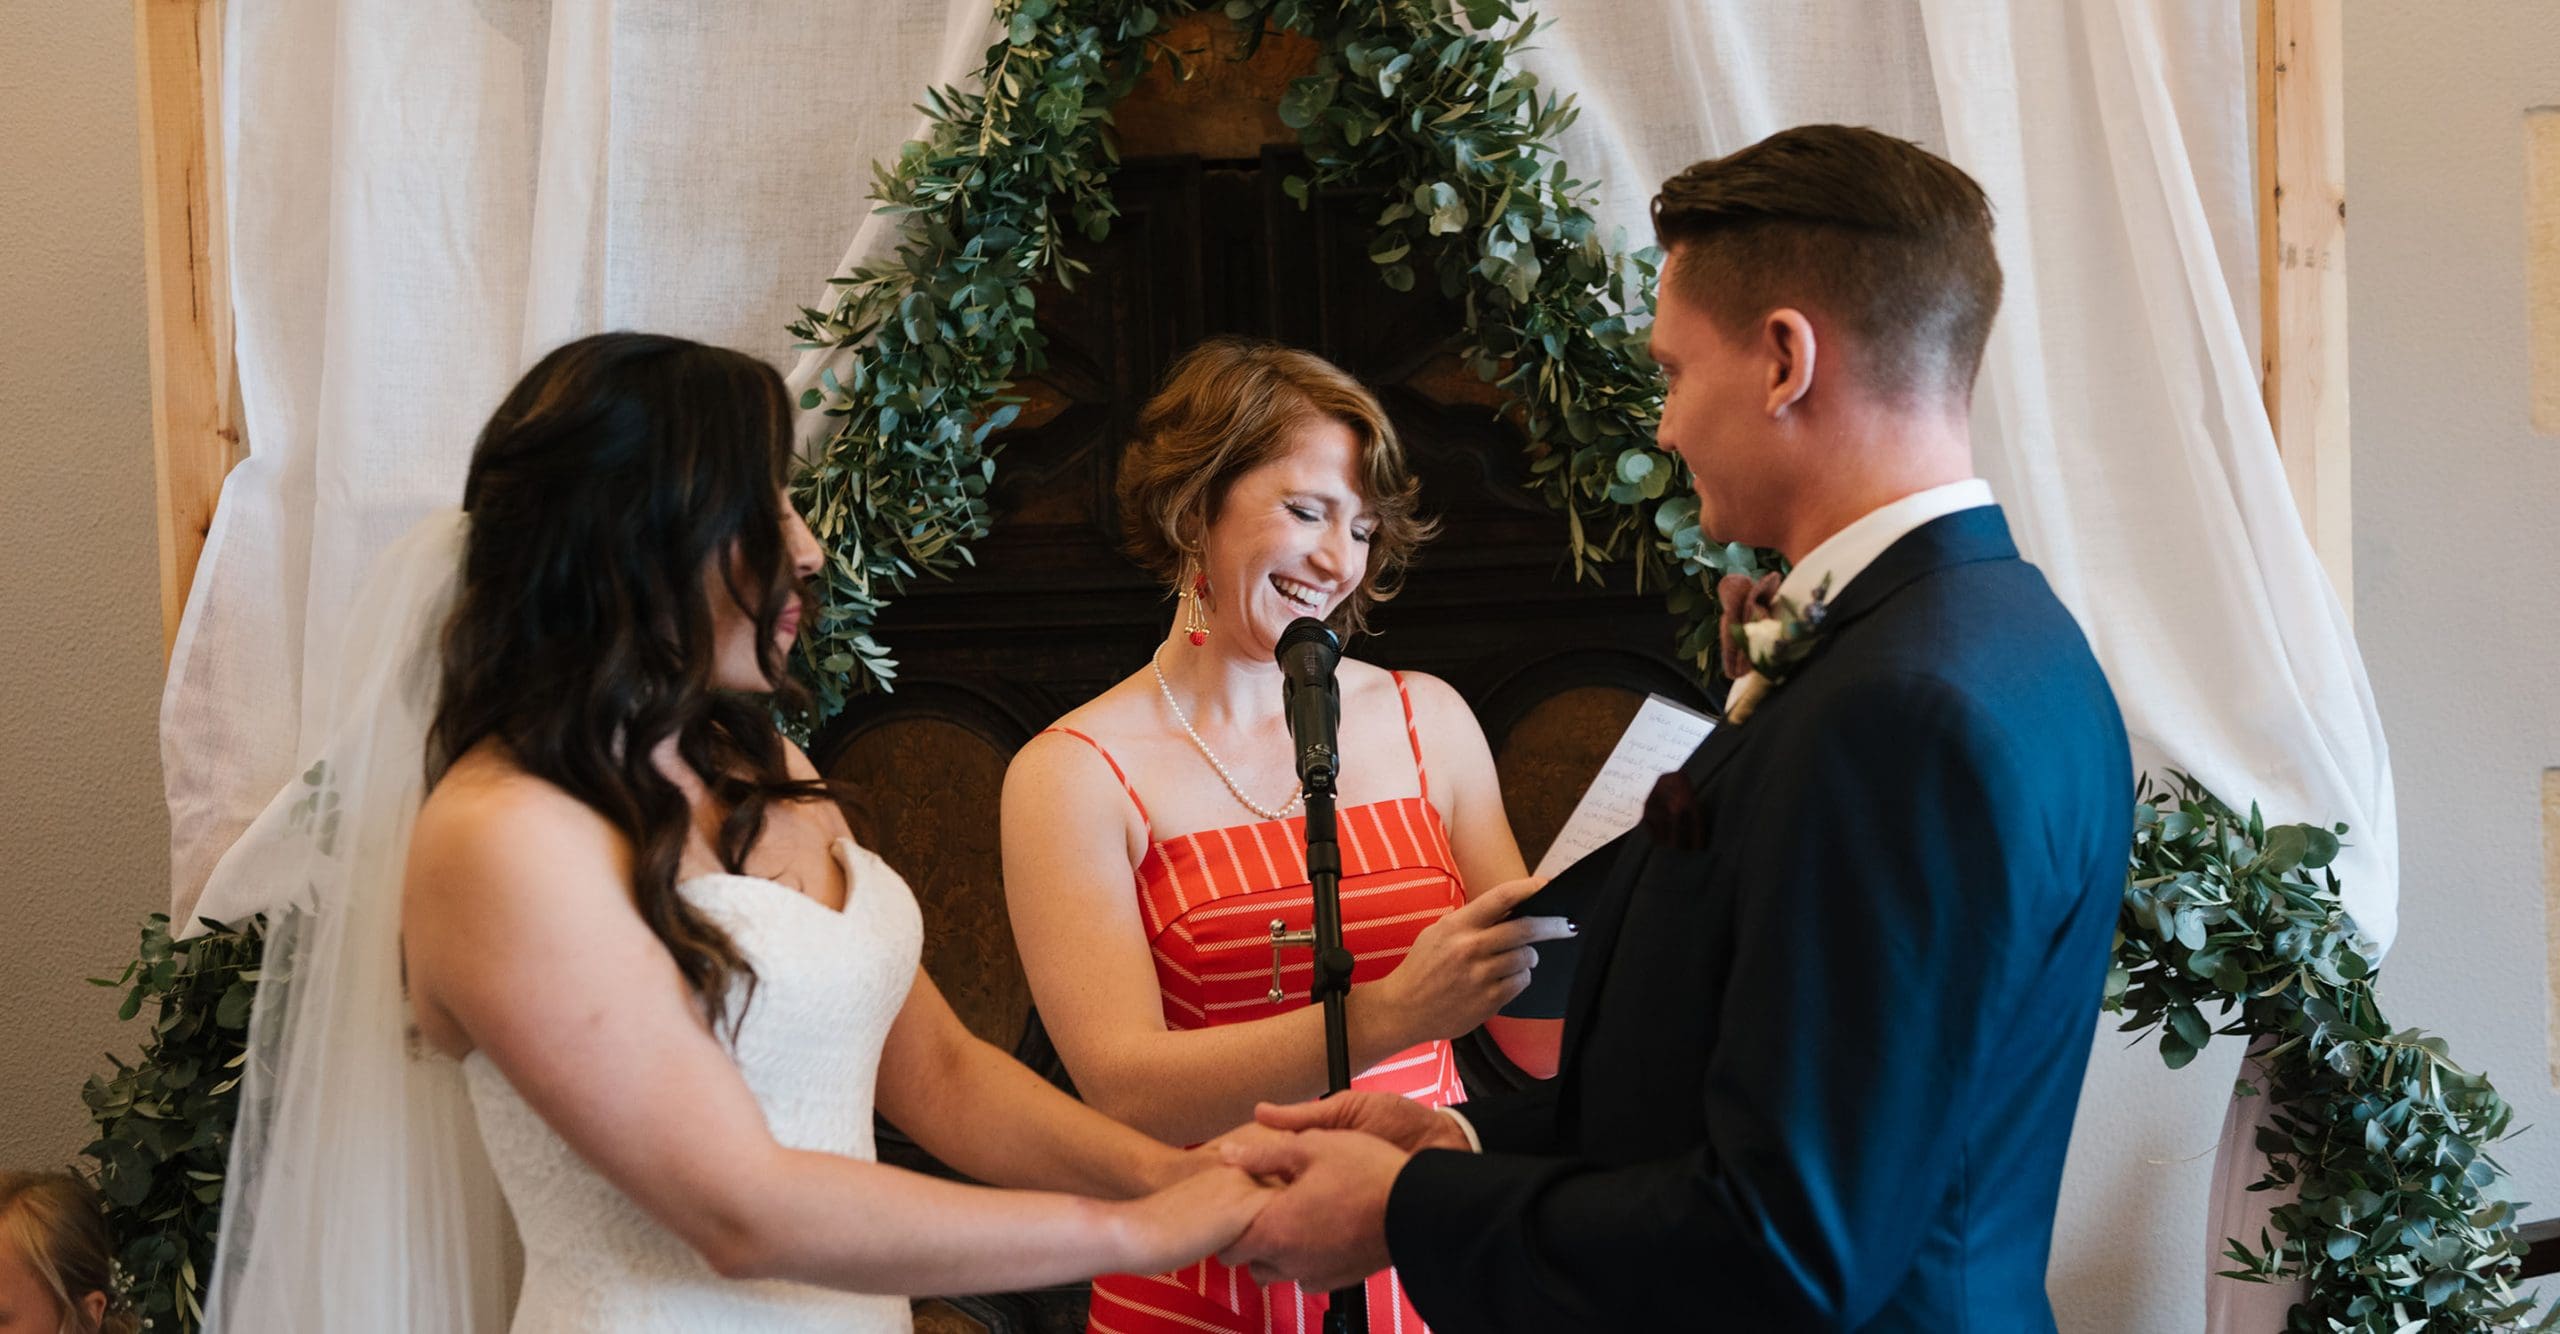 How to become an officiant in NYC